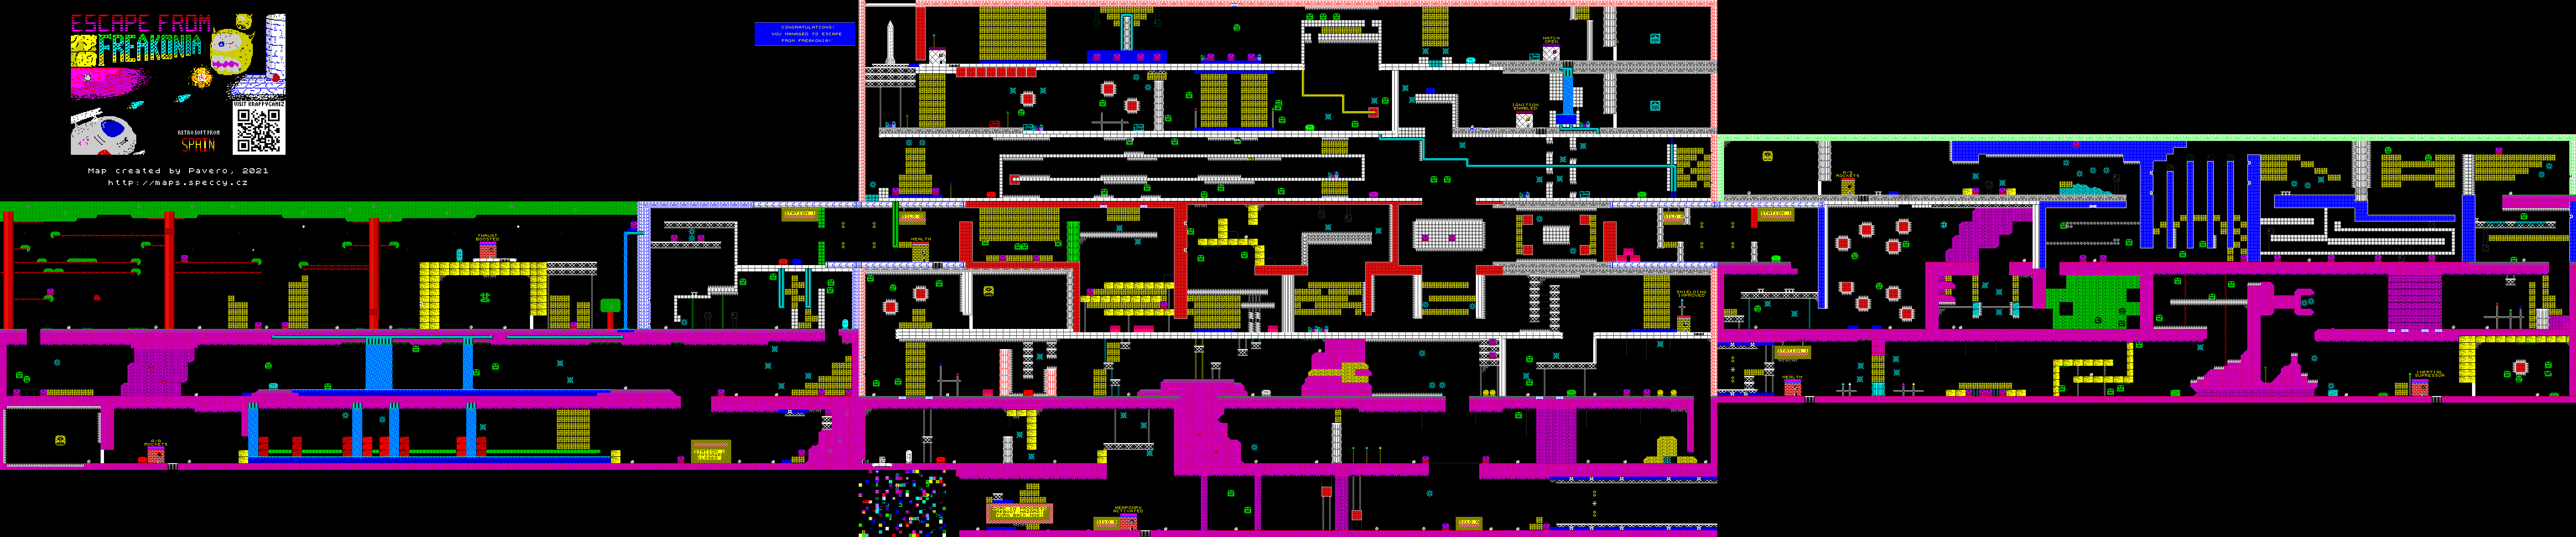 Escape from Freakonia - The Map